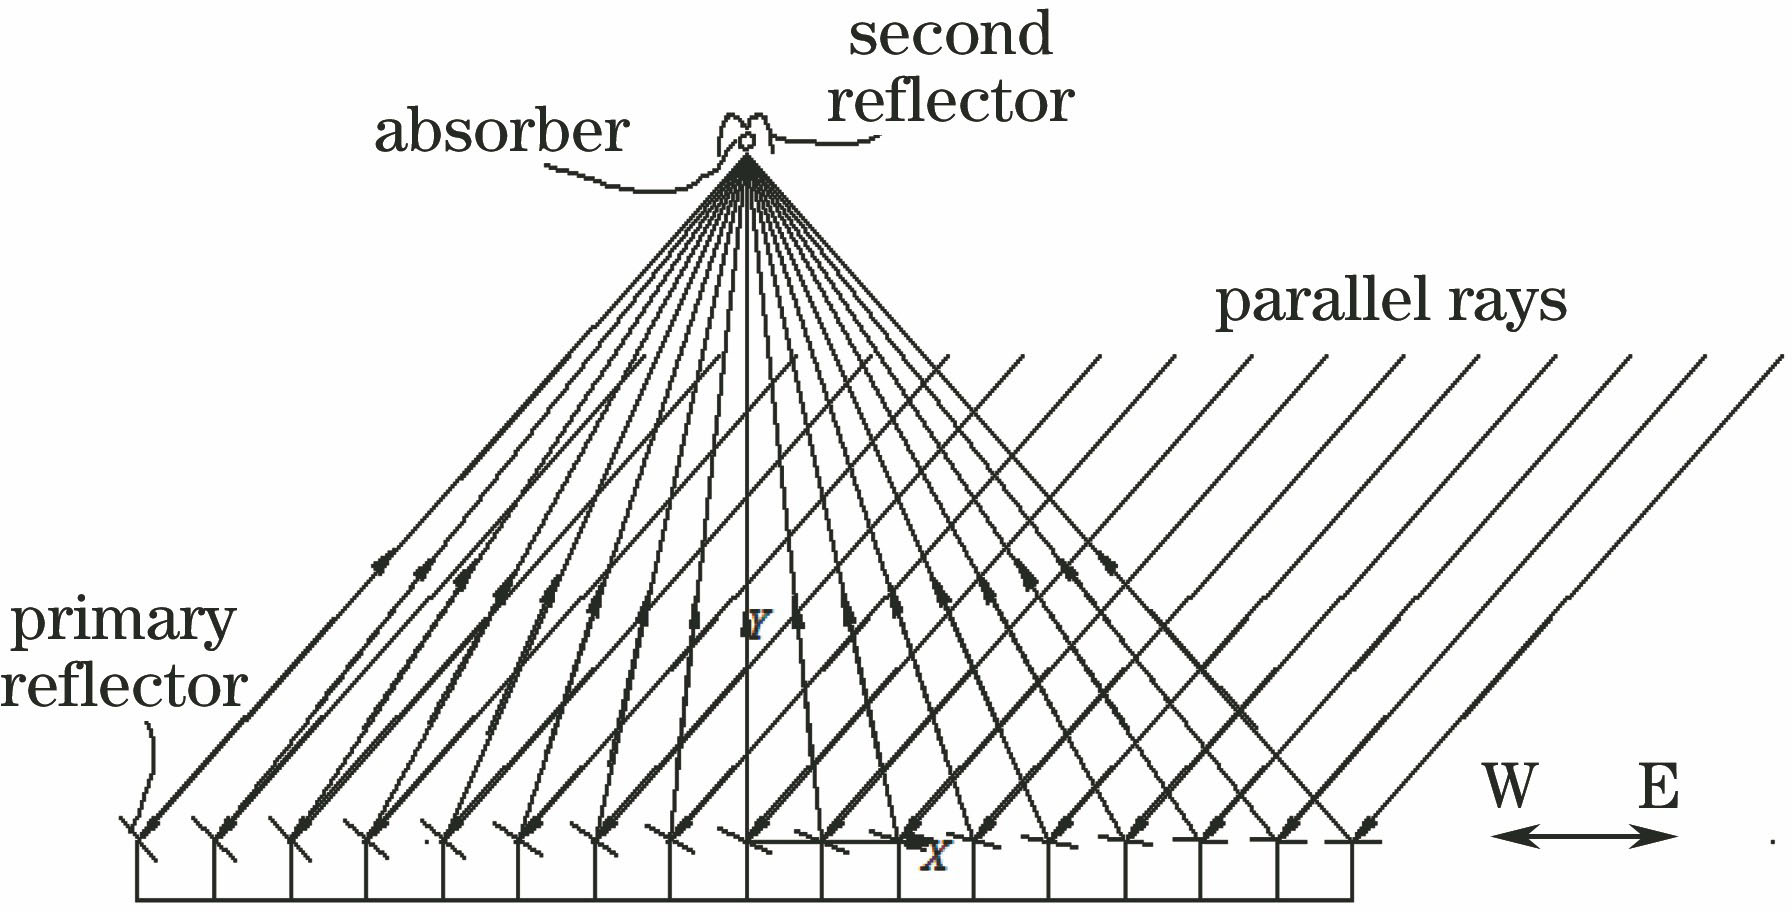 Schematic of typical linear Fresnel reflector